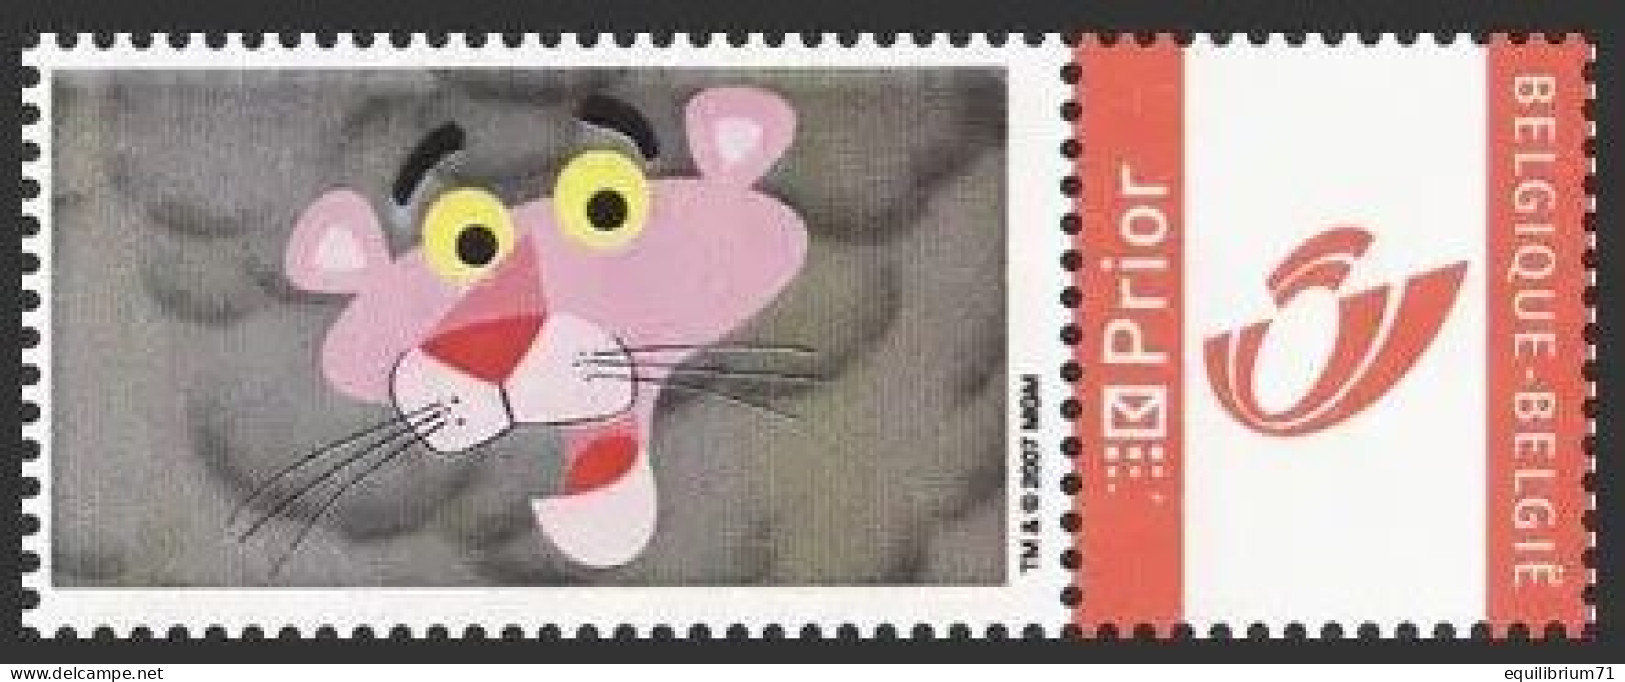 DUOSTAMP** / MYSTAMP** - La Panthère Rose /  The Pink Panther - Philastrips